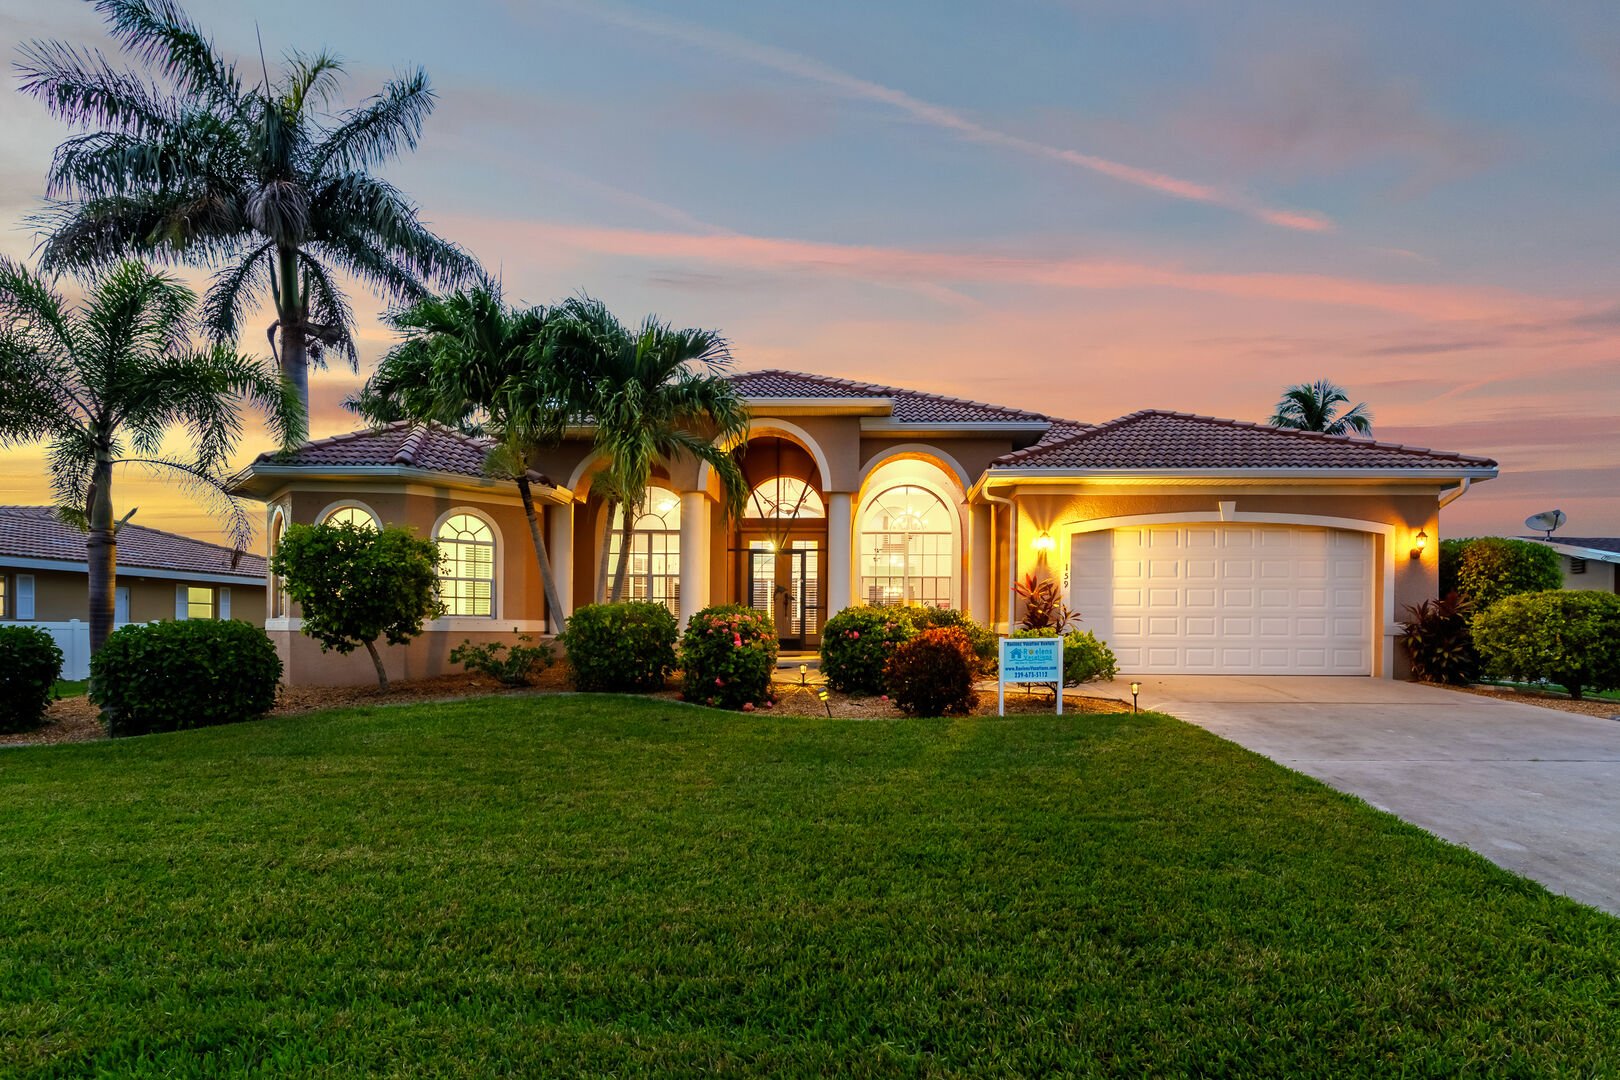 Cape Coral vacation home with 4 bedrooms